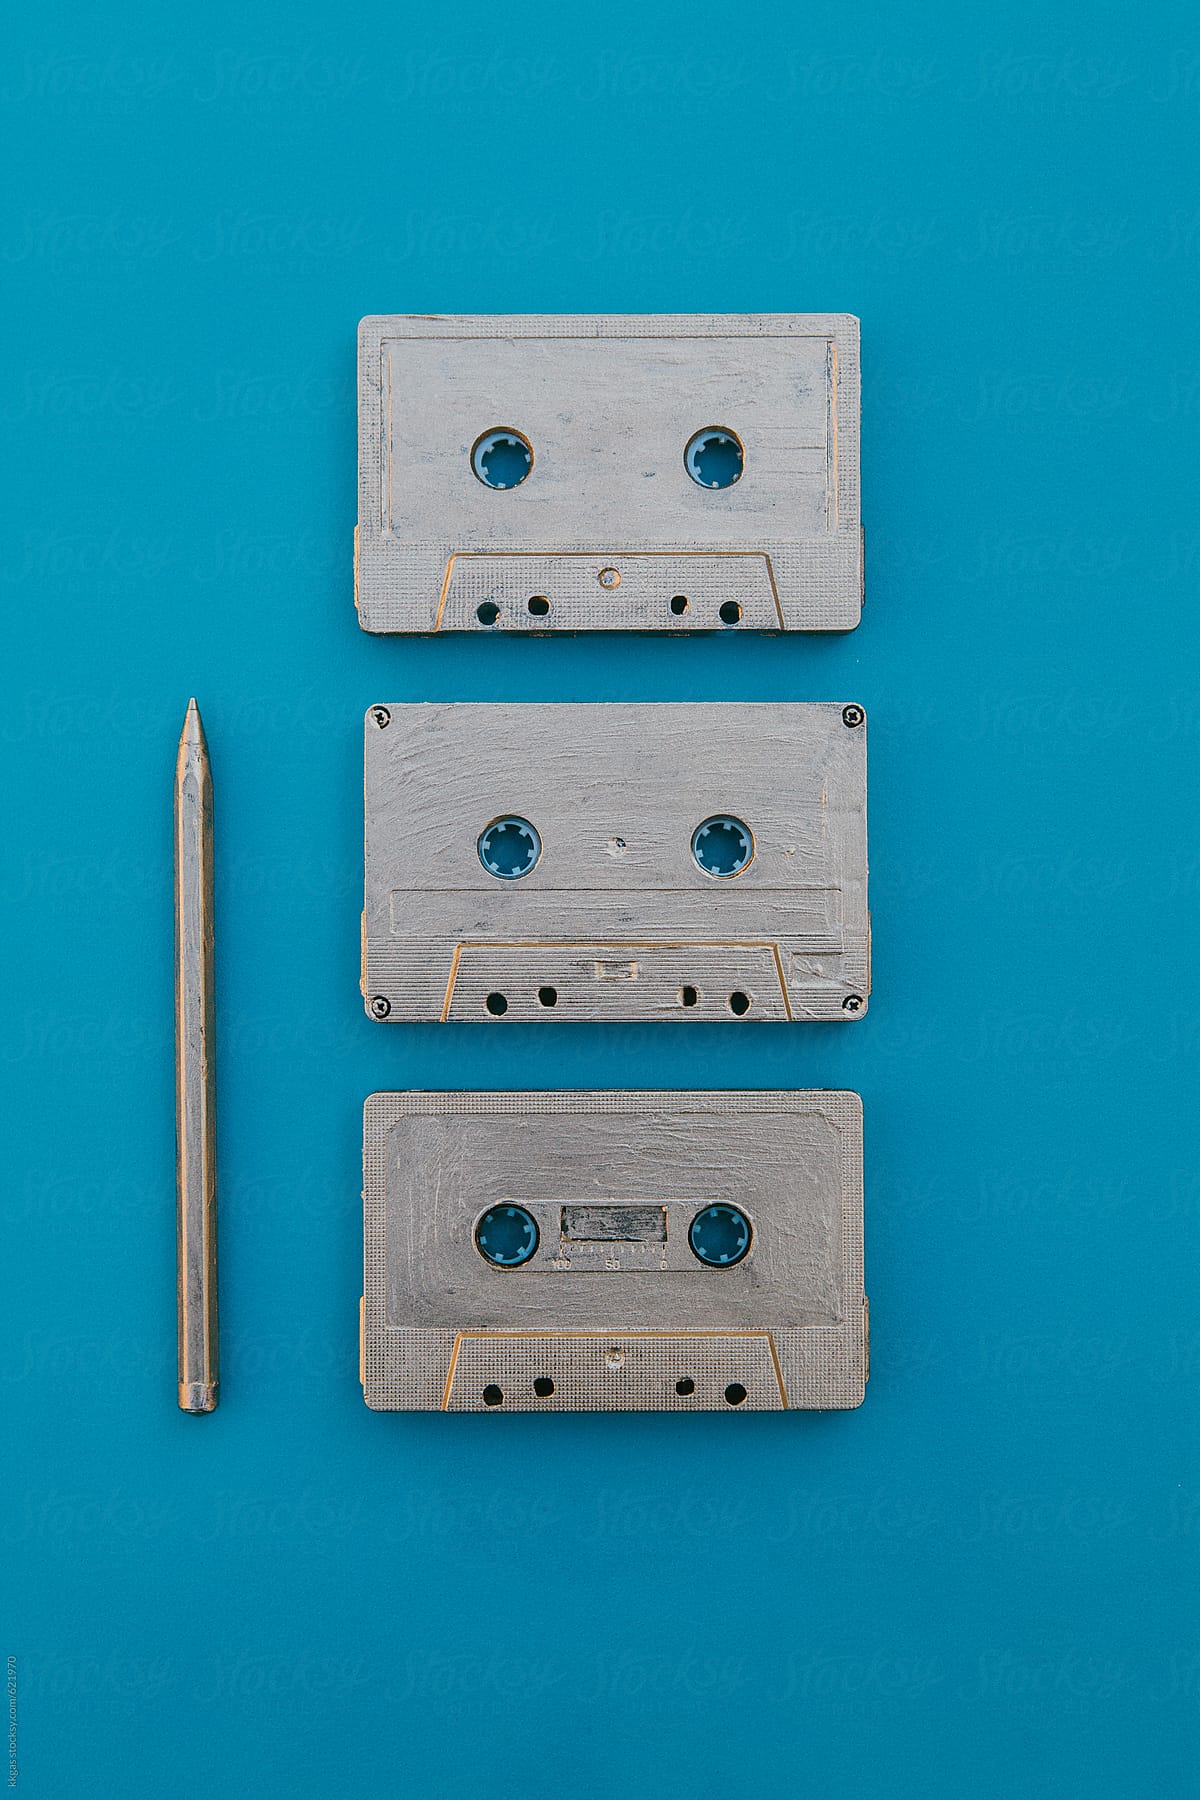 Gold cassette tapes and a rewinder pen